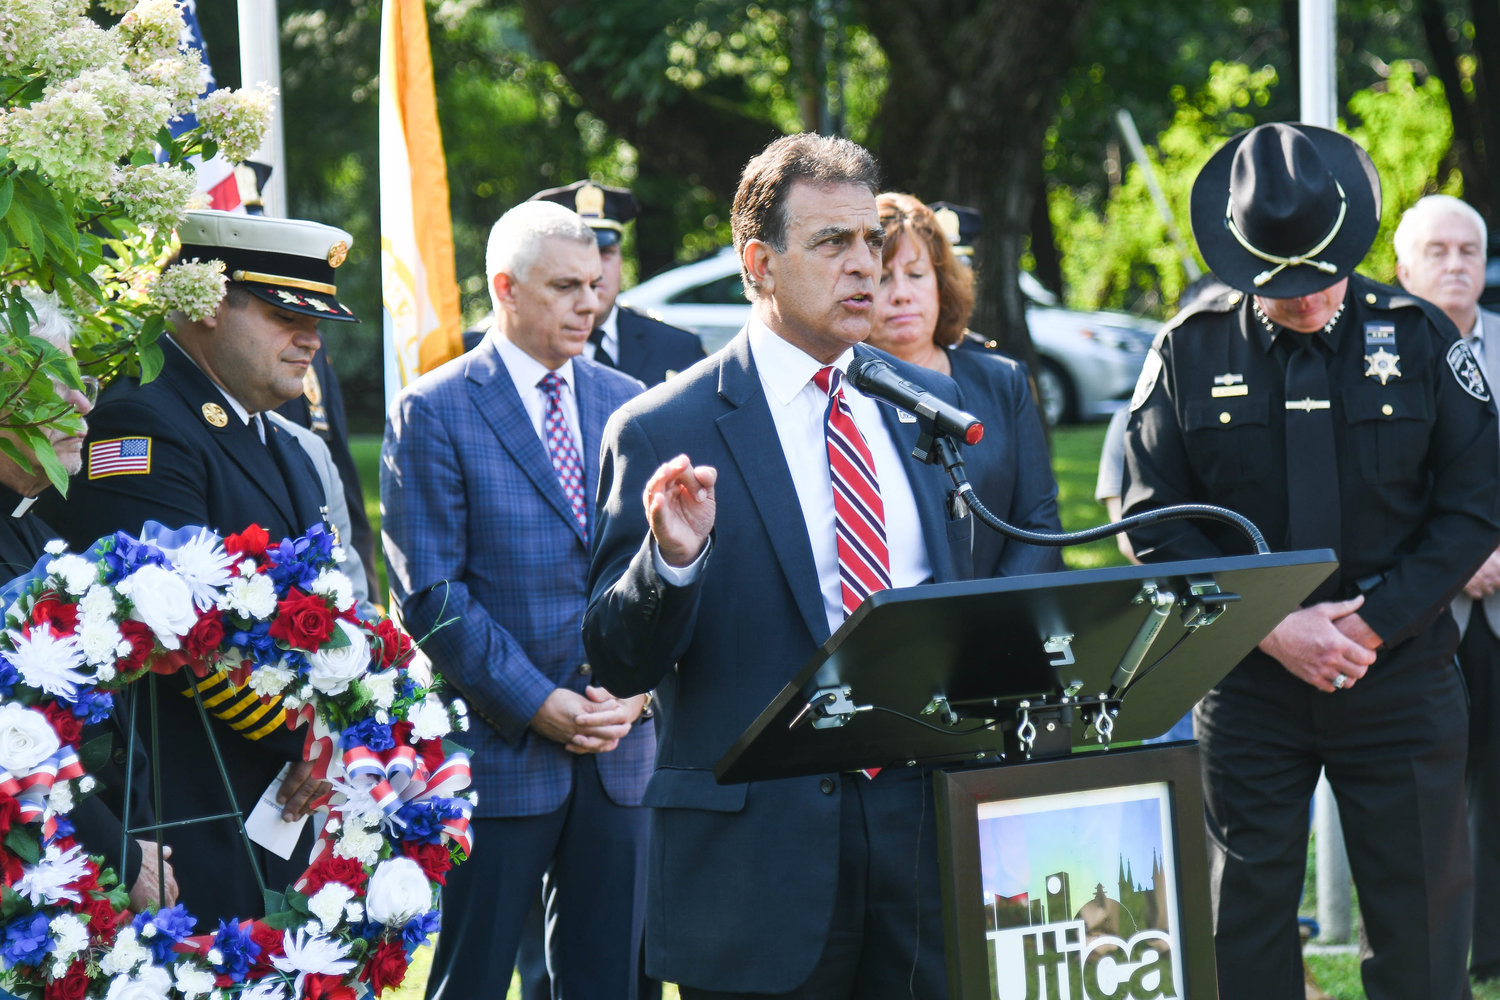 Utica Mayor Robert Palmieri speaks during the annual 9/11 Remembrance Ceremony on Friday morning at the 9/11 Memorial in Utica.